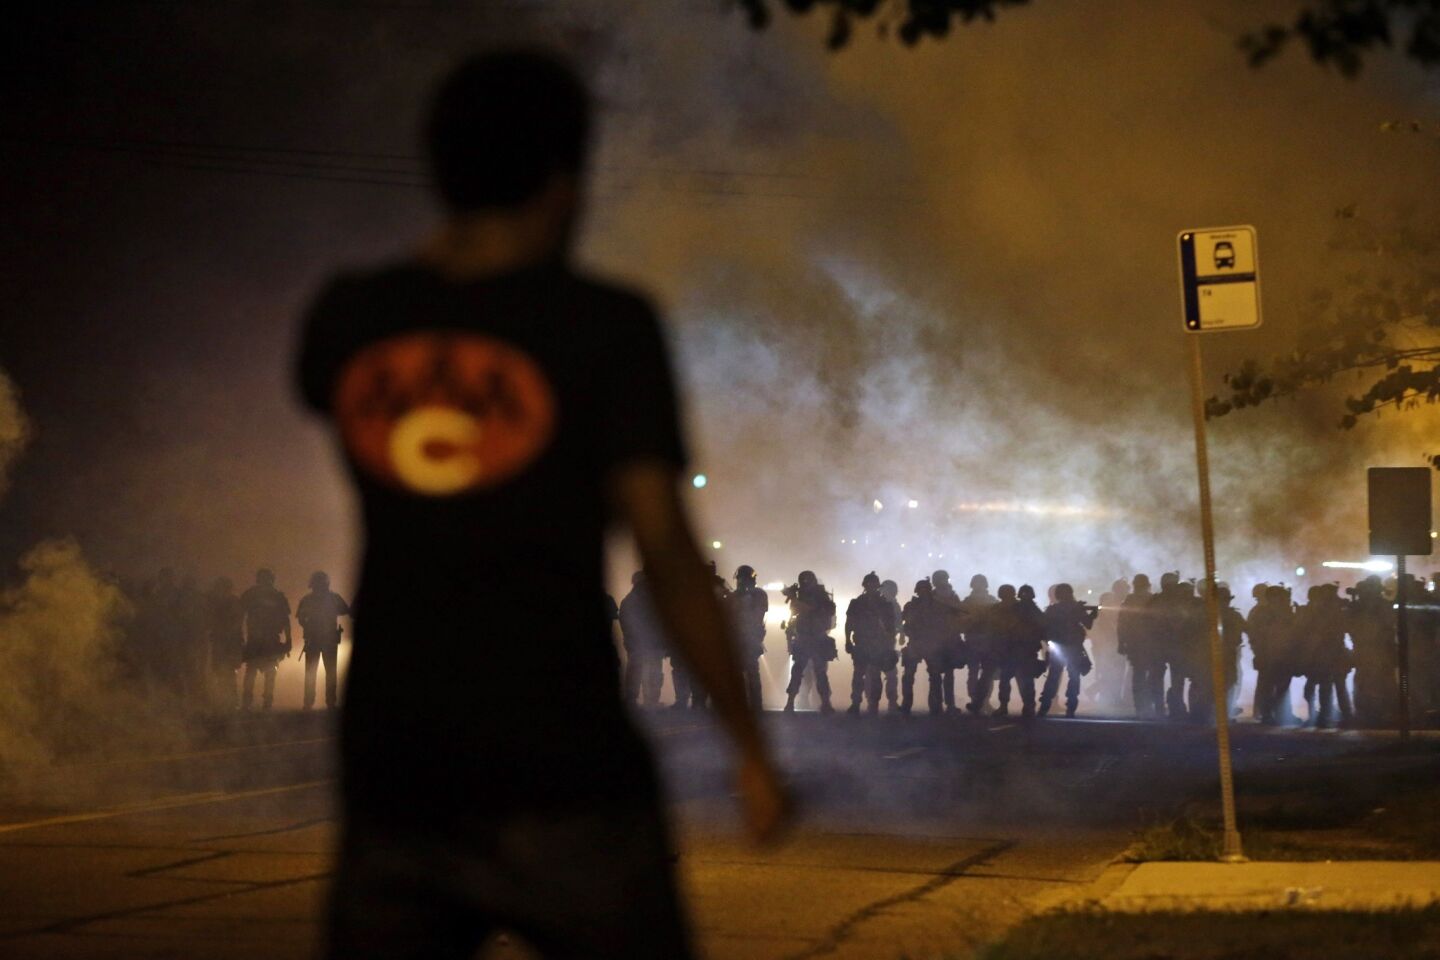 Smoke fills the nighttime air during a clash between police and protesters in Ferguson.